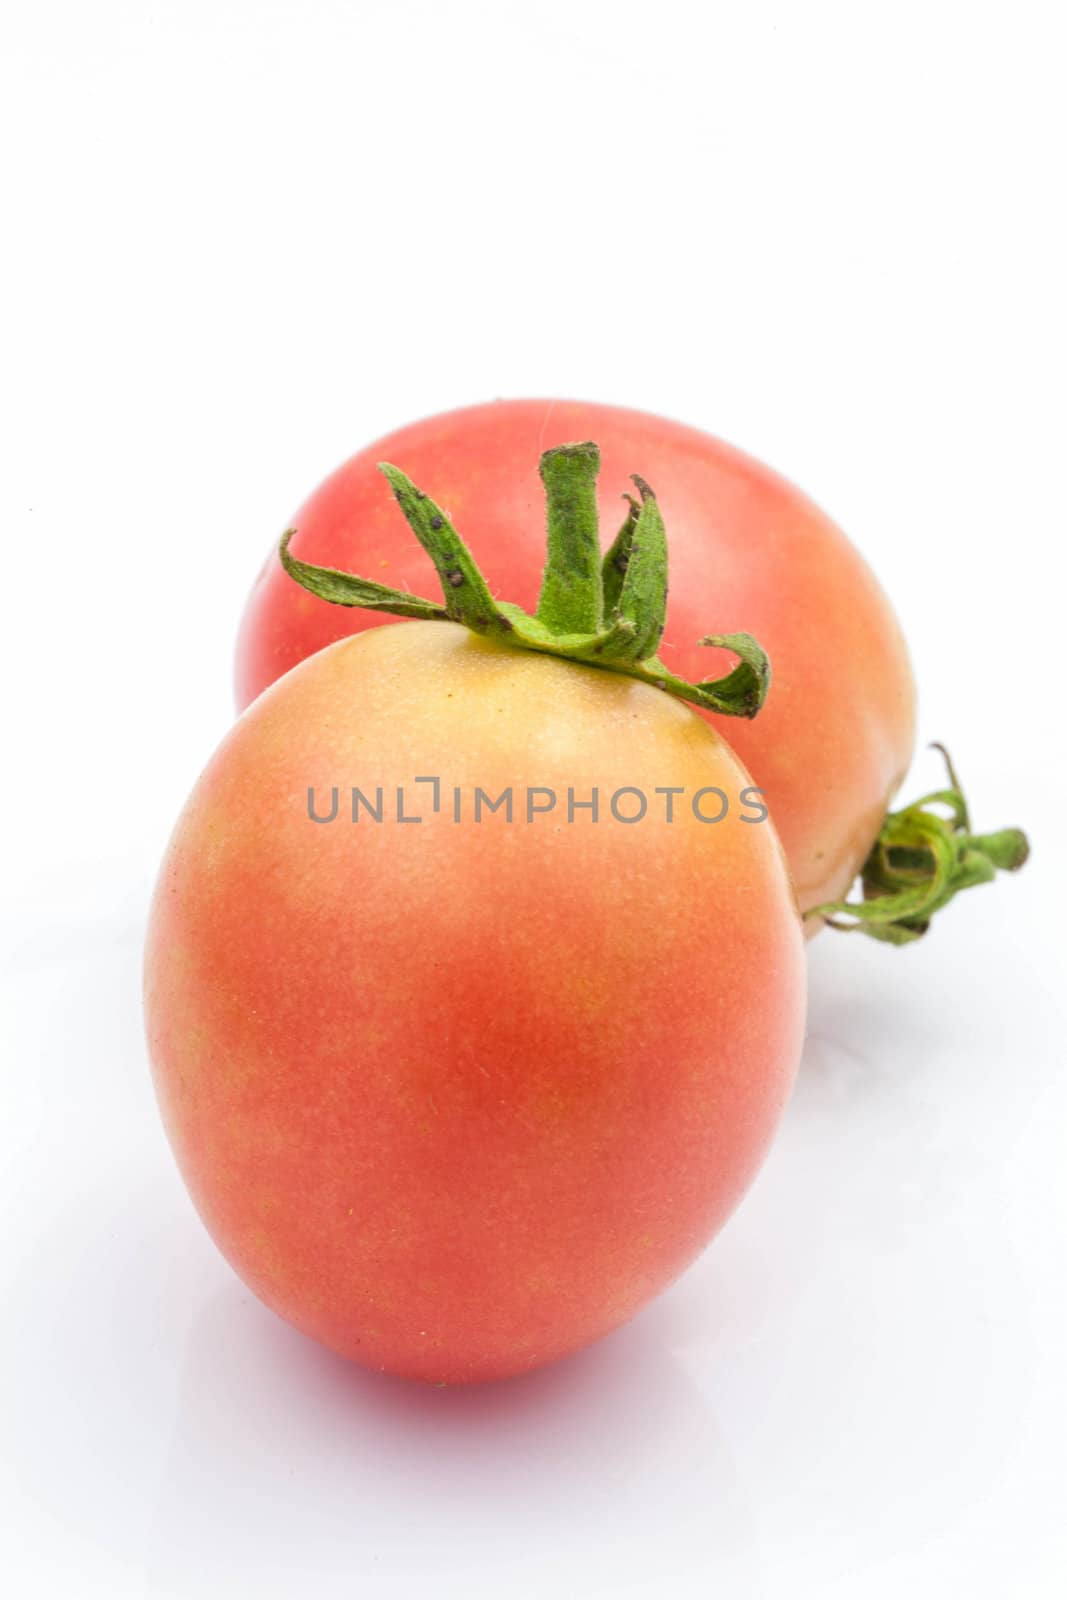 Tomato red is placed on a white background.